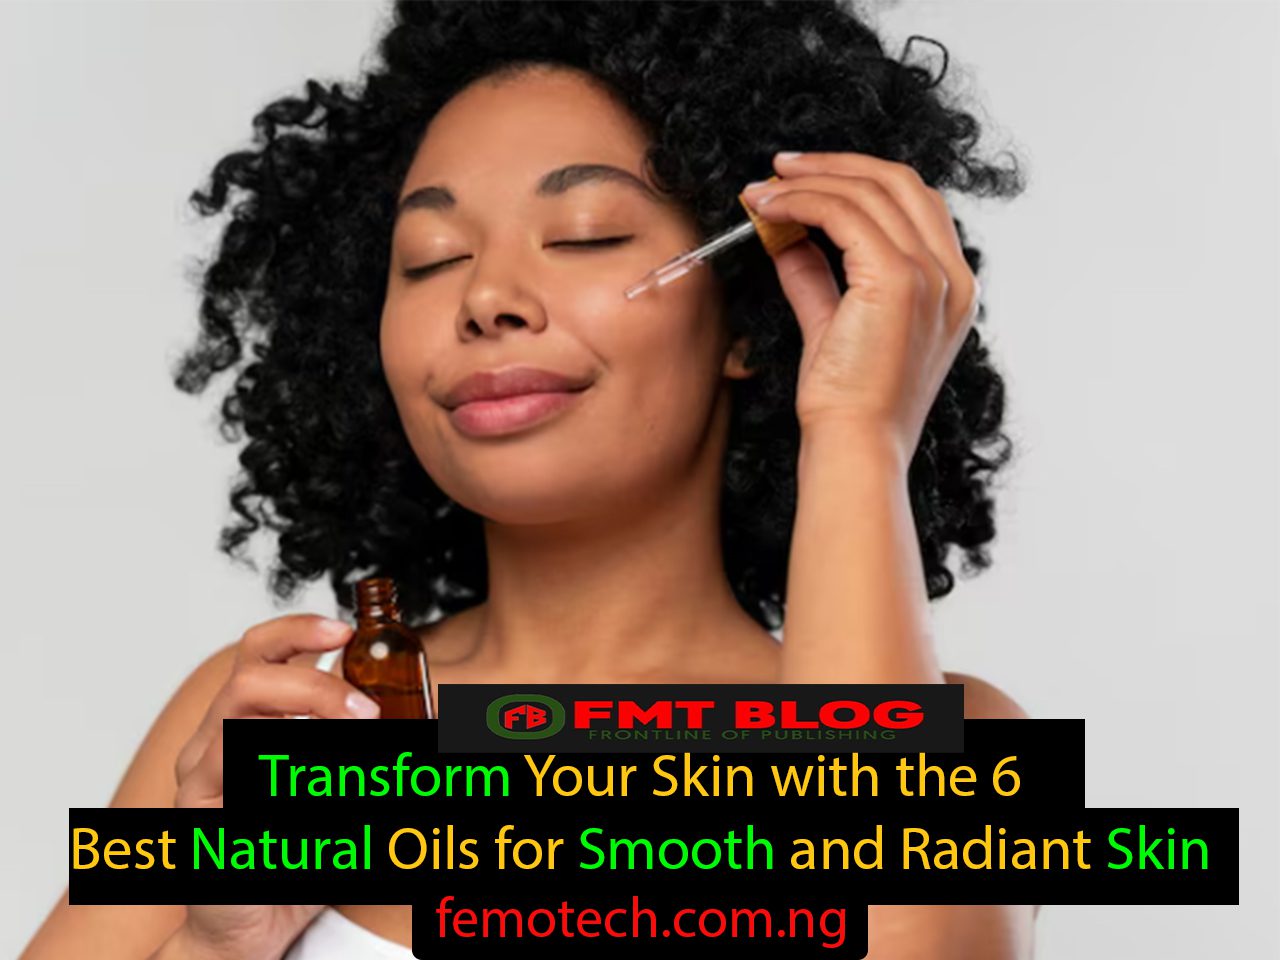 Transform Your Skin with the 6 Best Natural Oils for Smooth and Radiant Skin 